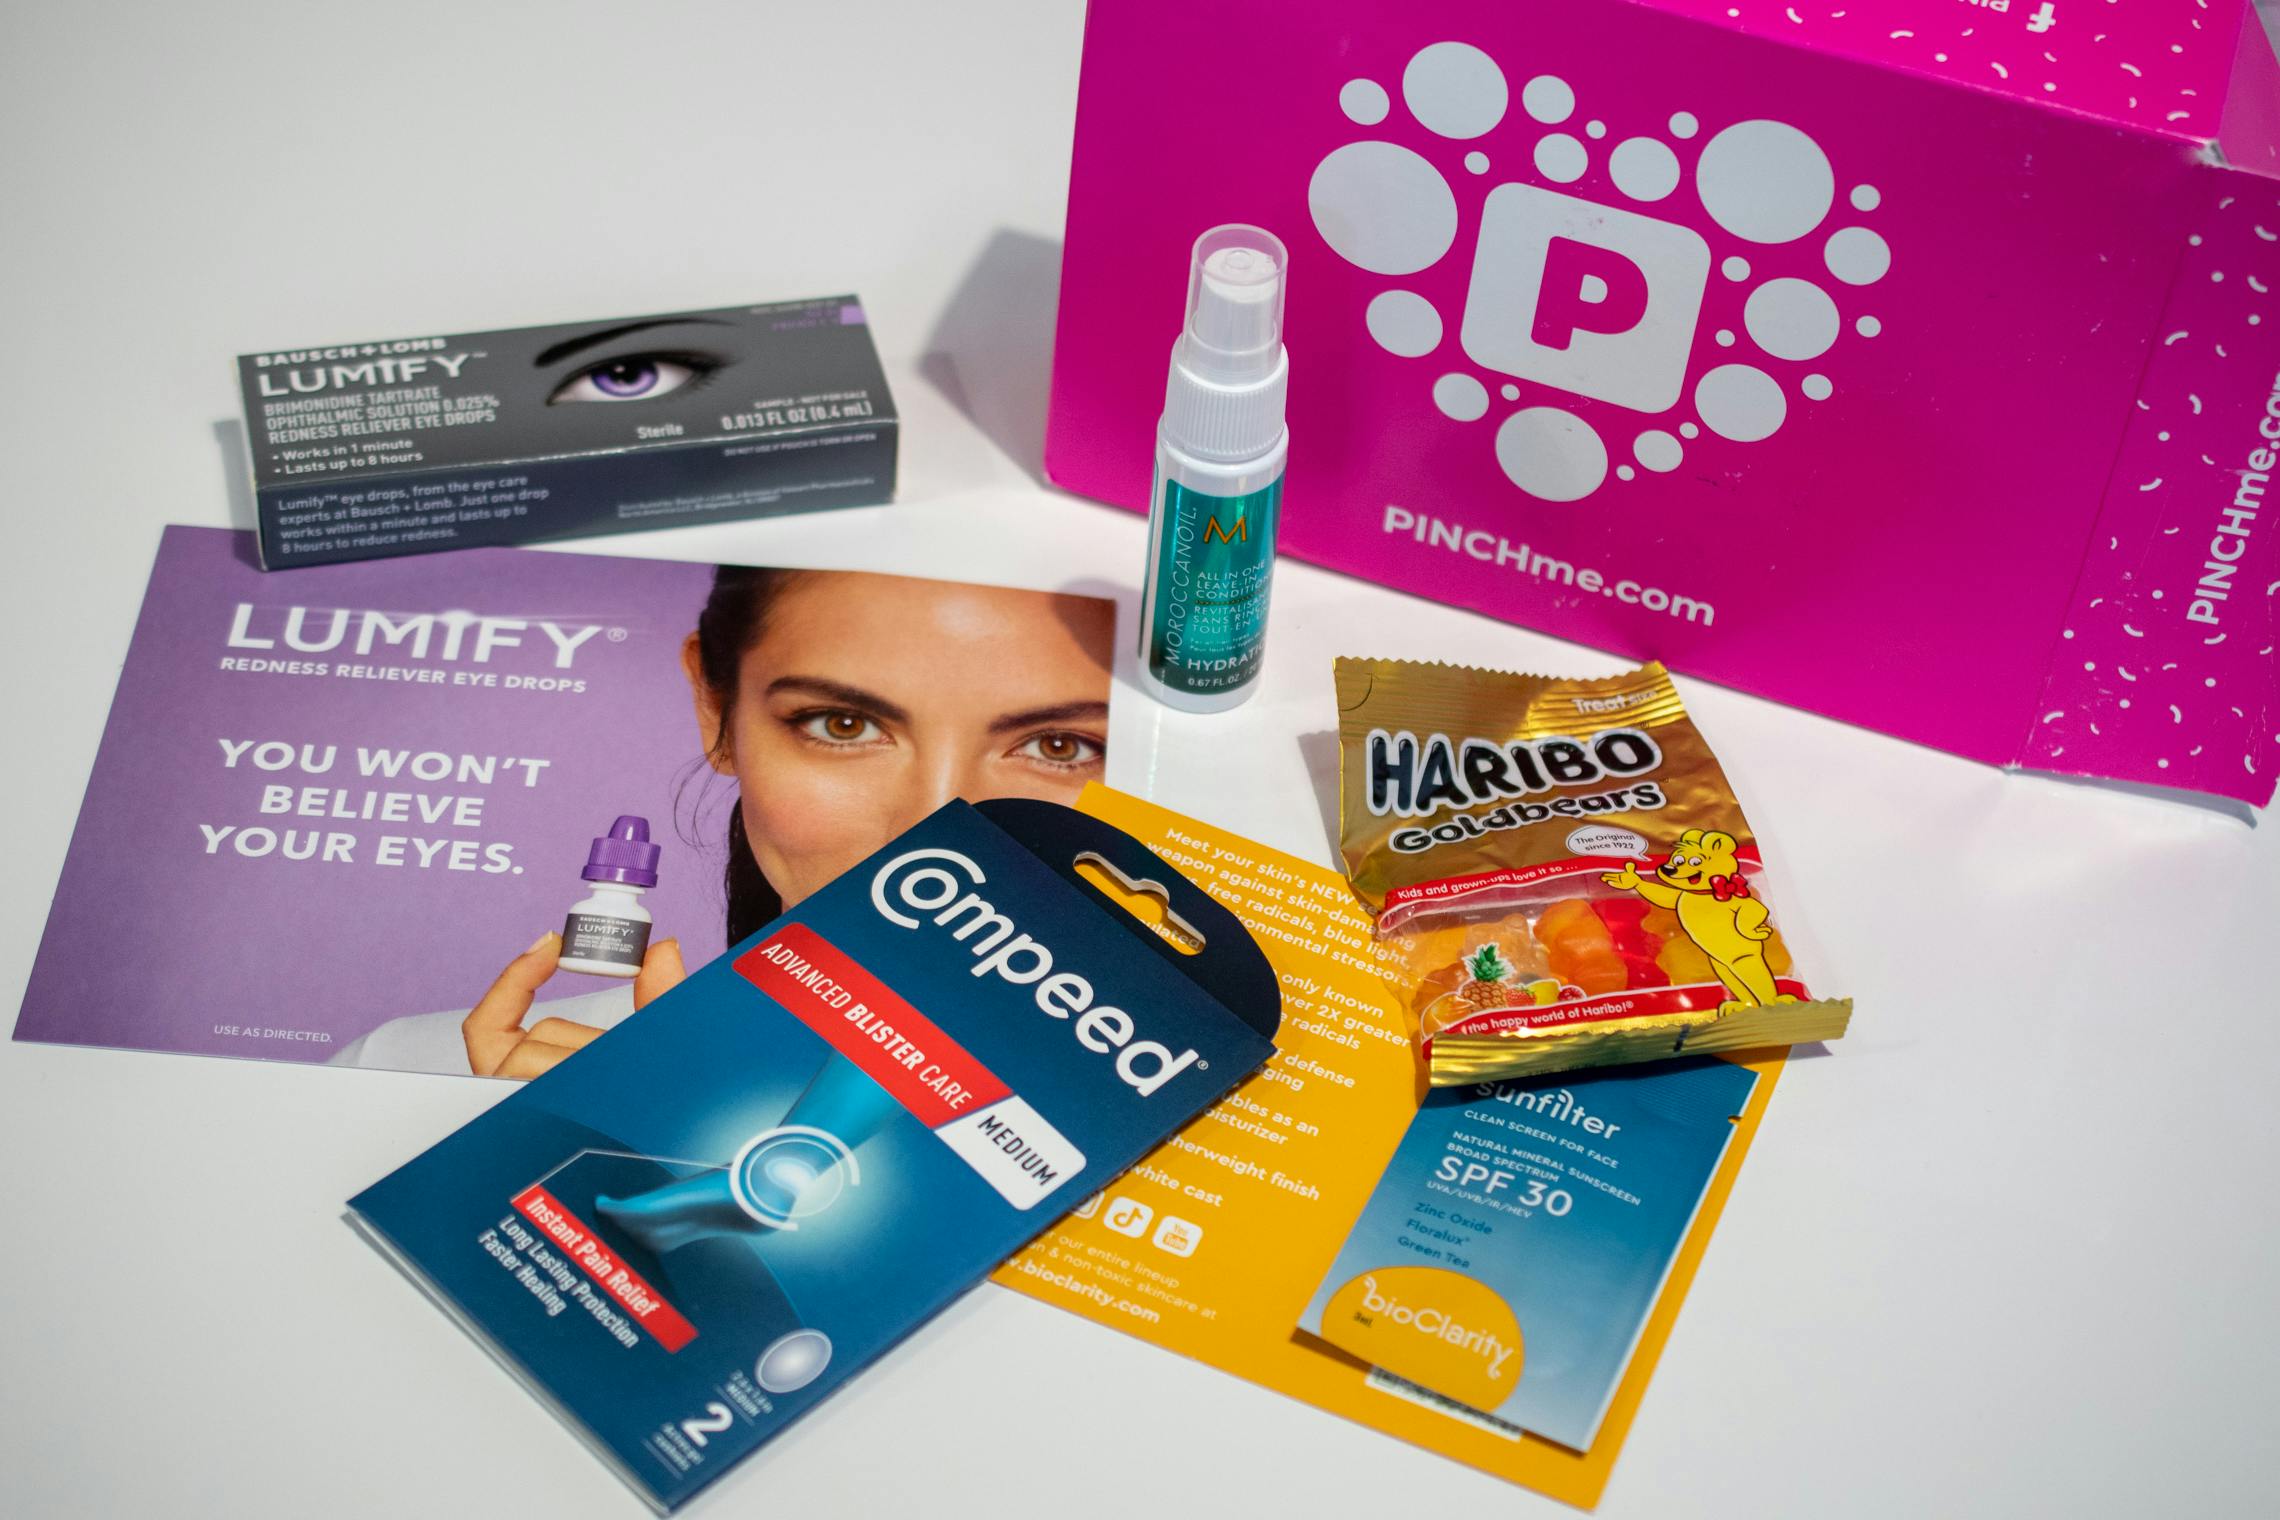 A pink box from PINCHme with free samples of products like Lumify, Compeed, and Haribo Gummy Bears scattered next to it.